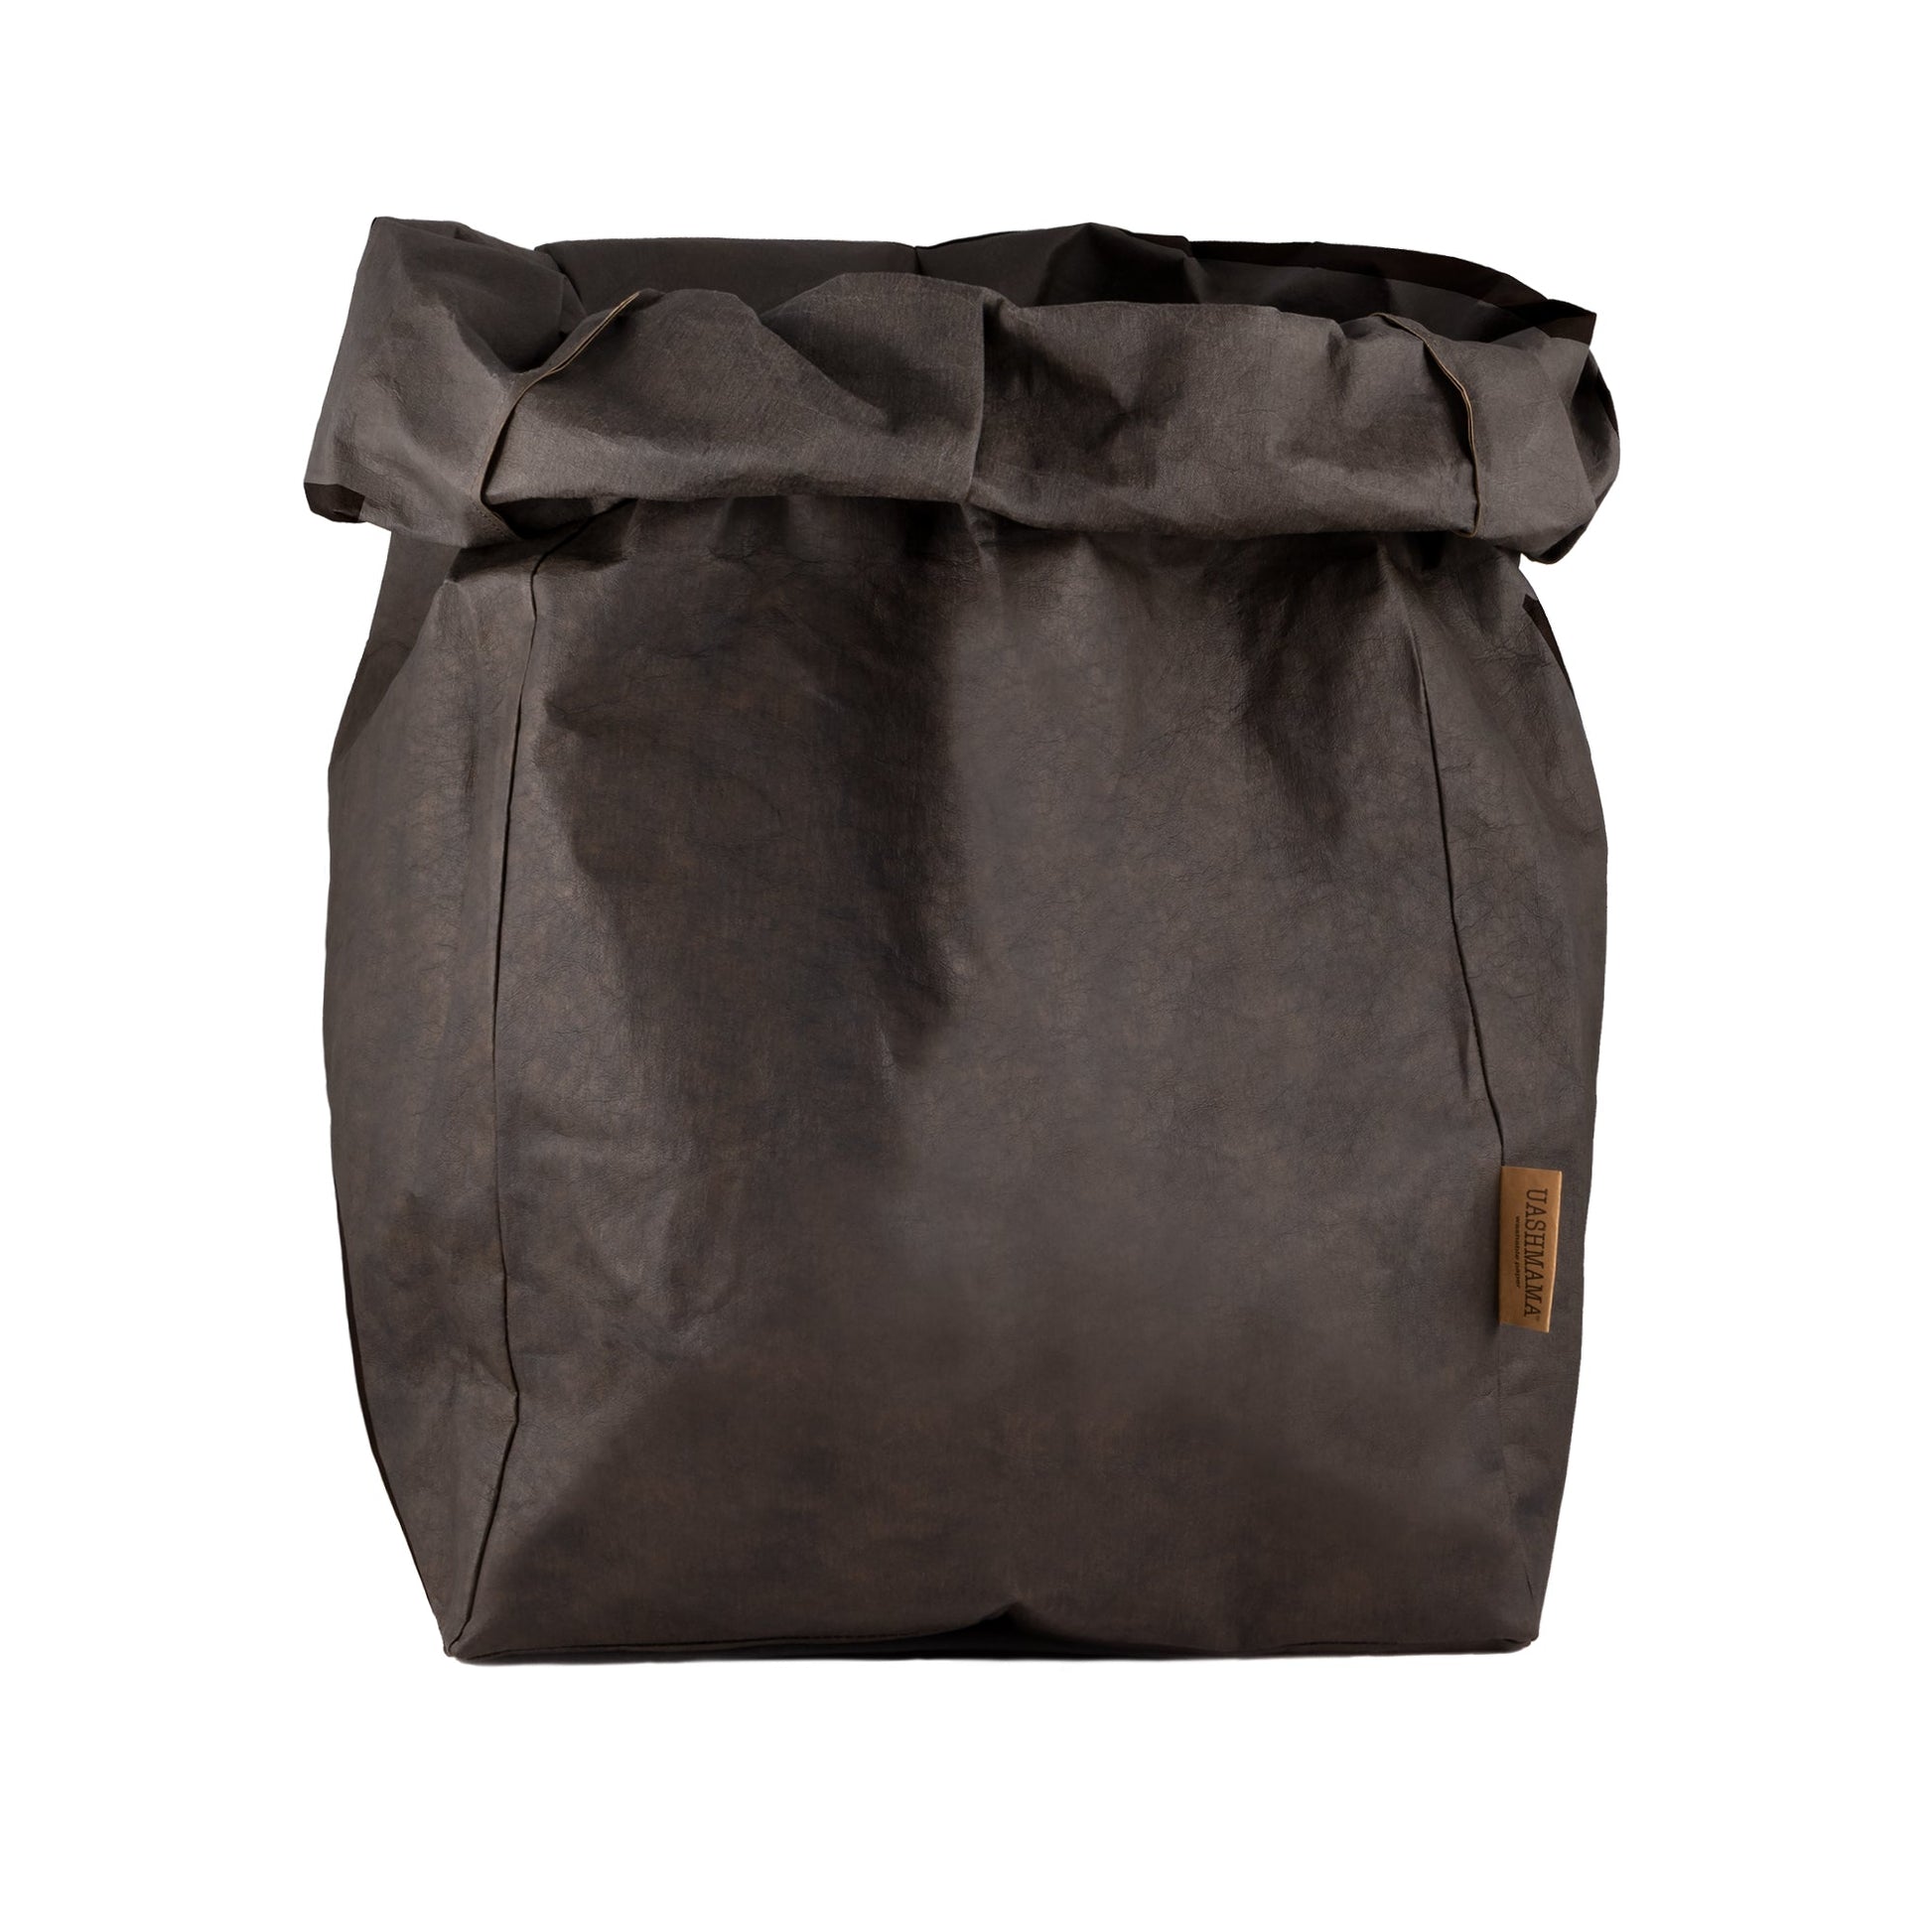 A washable paper bag is shown. The bag is rolled down at the top and features a UASHMAMA logo label on the bottom left corner. The bag pictured is the gigantic size in dark brown.